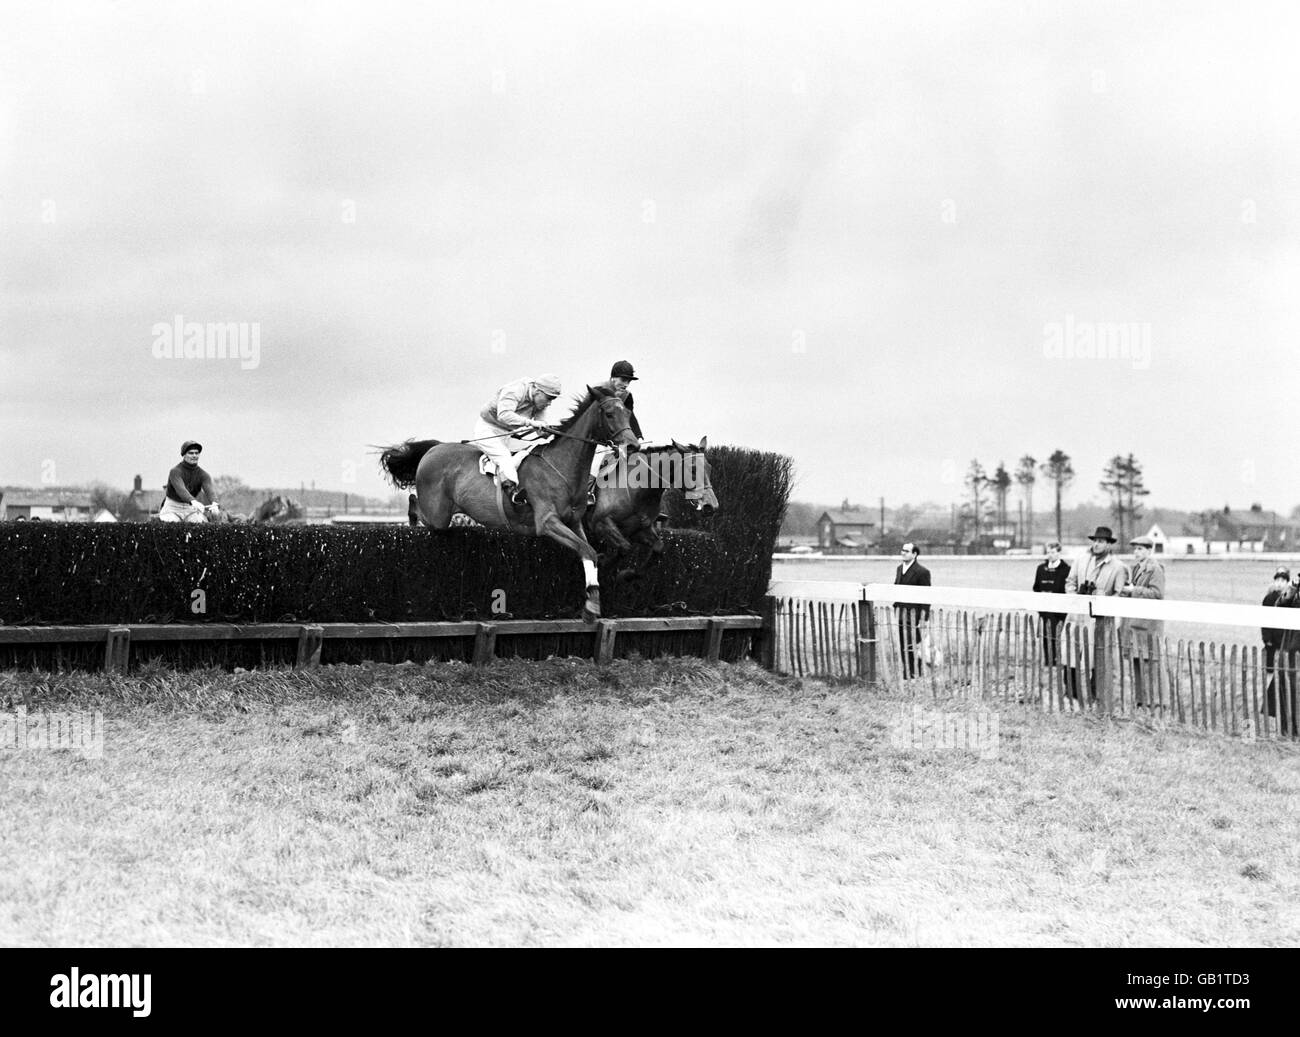 John lawrence up Black and White Stock Photos & Images - Alamy